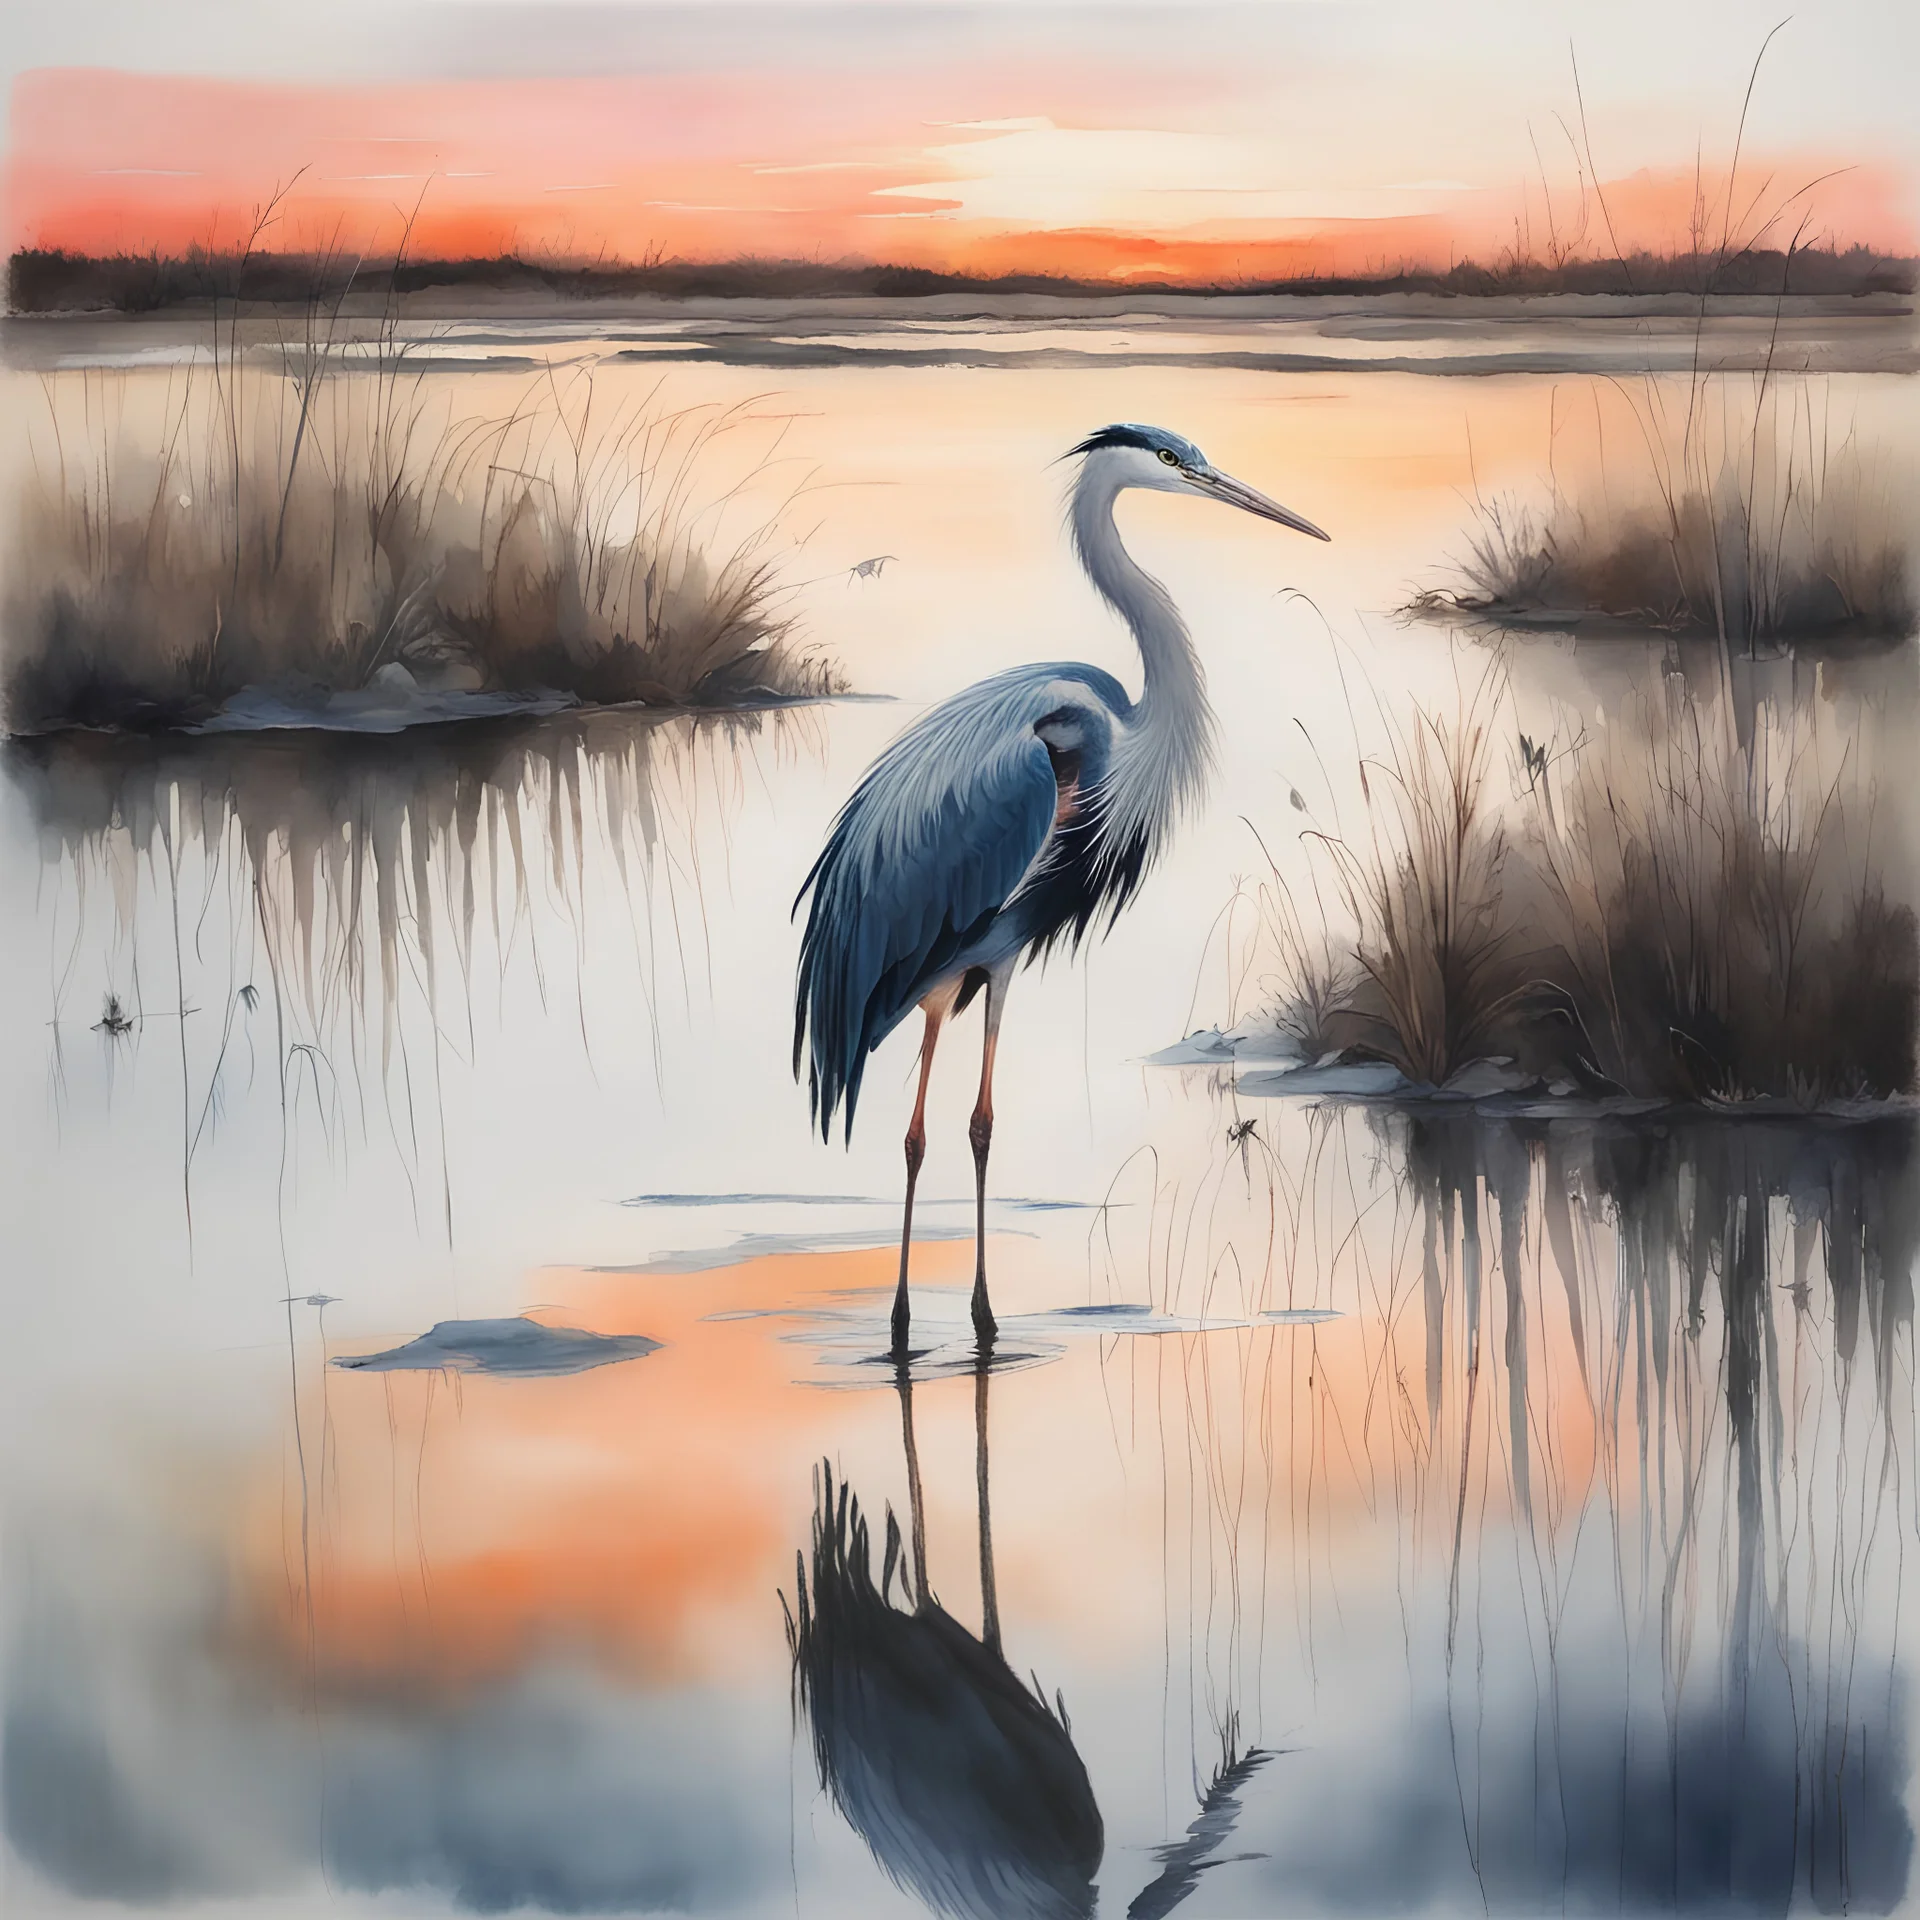 long-legged heron wading in a marsh's tidal pool, pastel duotone colors, loose brush stroke watercolor, sunset, reflective, wet sponge, diffusion paint drip, dramatic, by Lisbeth Zweger